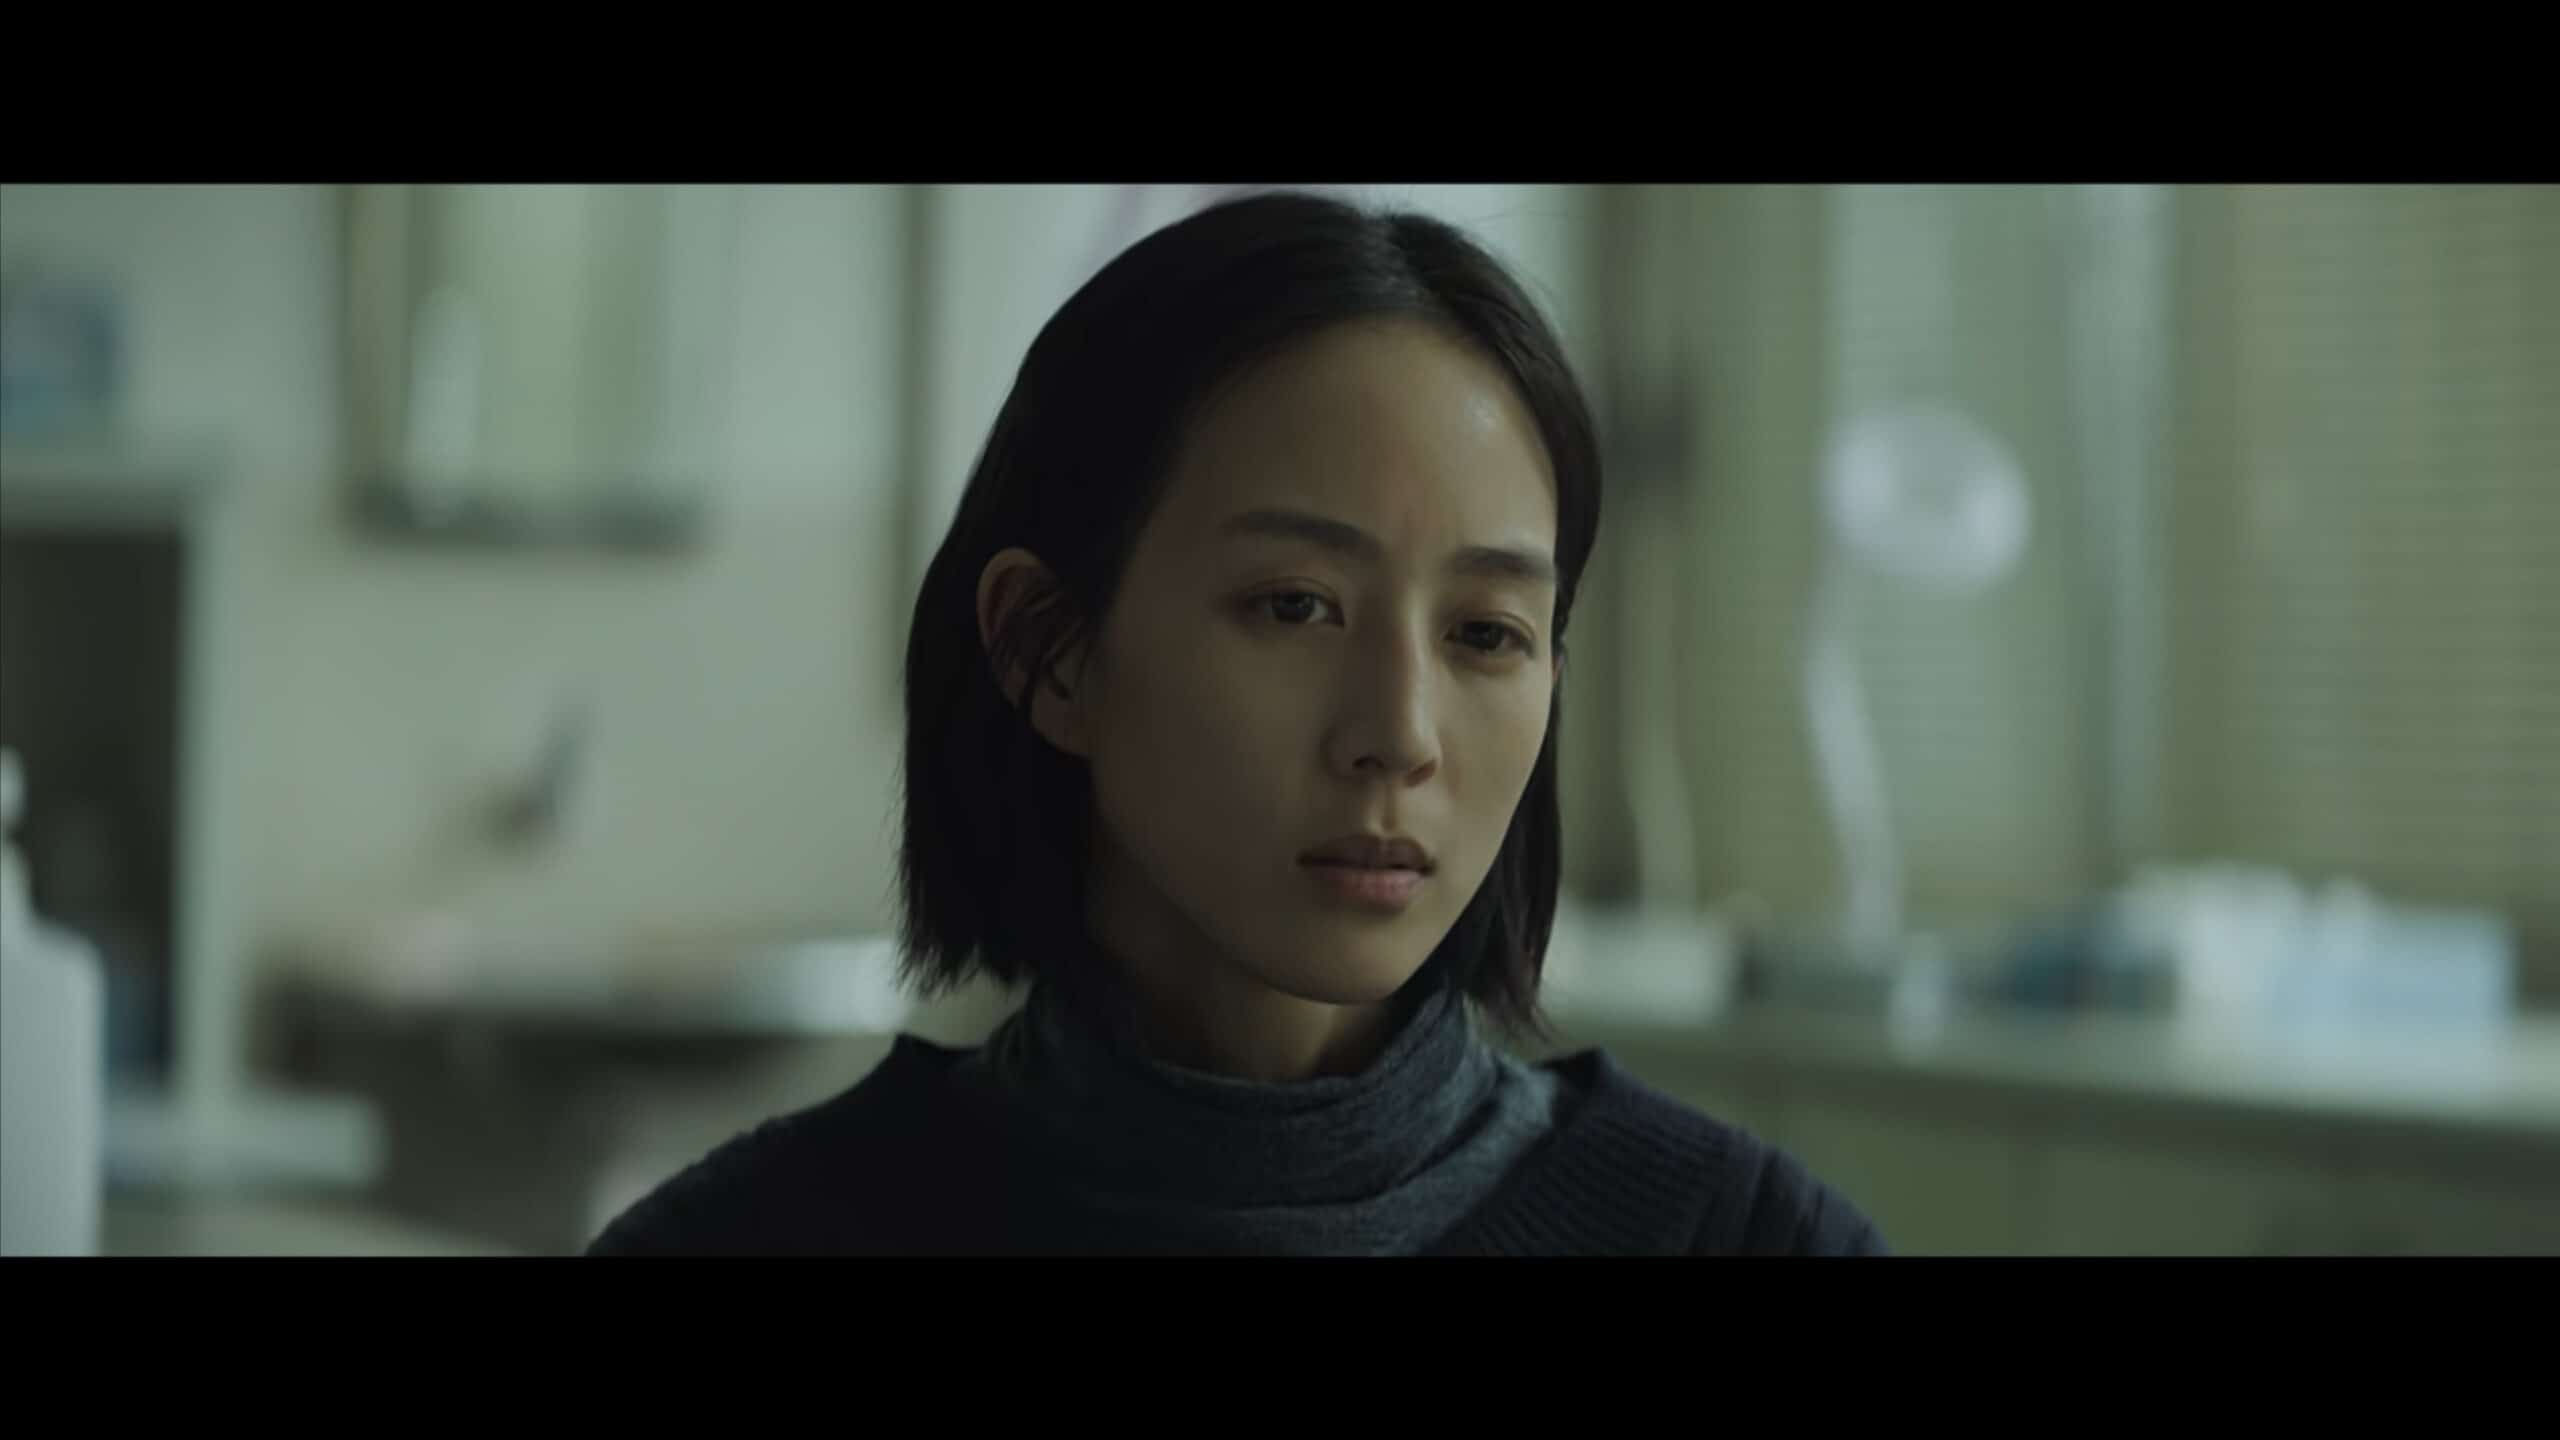 Deputy Captain Wu Chieh (Janine Chang) barely paying attention and out of it